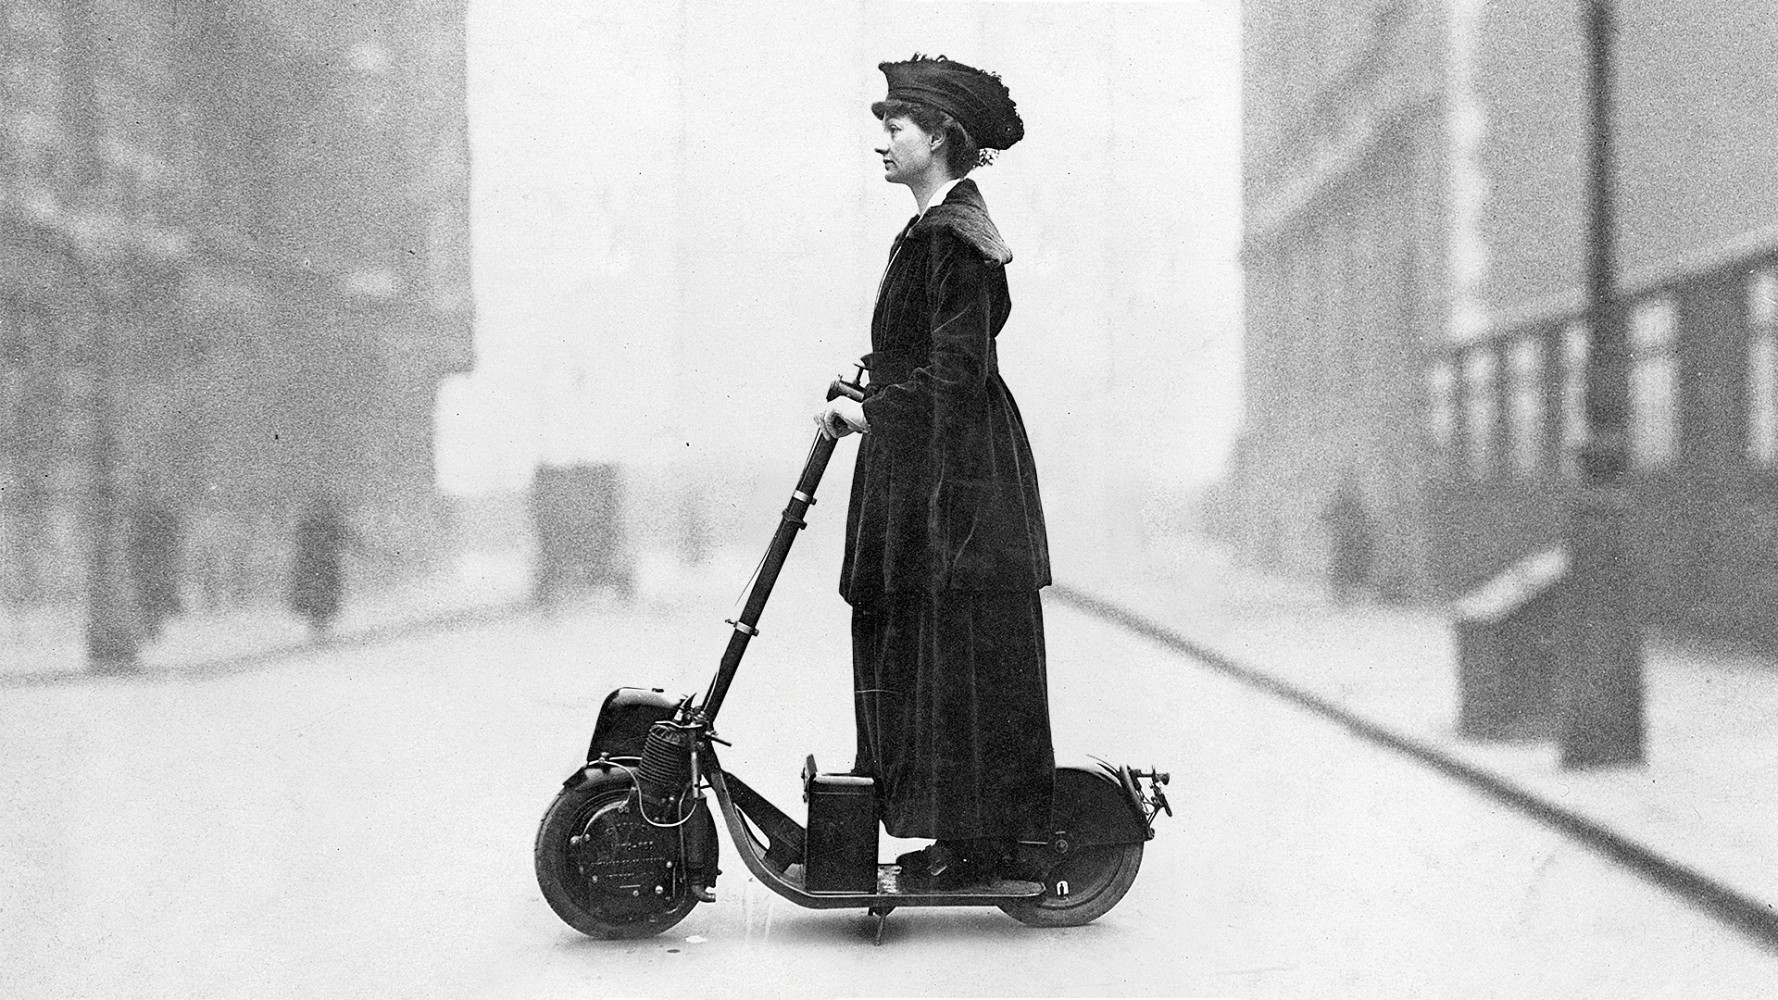 Florence, Lady Norman (1884 - 1964), traveling on her motor scooter to the offices, London, circa 1916. (Photo by Paul Thompson/FPG/Archive Photos/Getty Images)